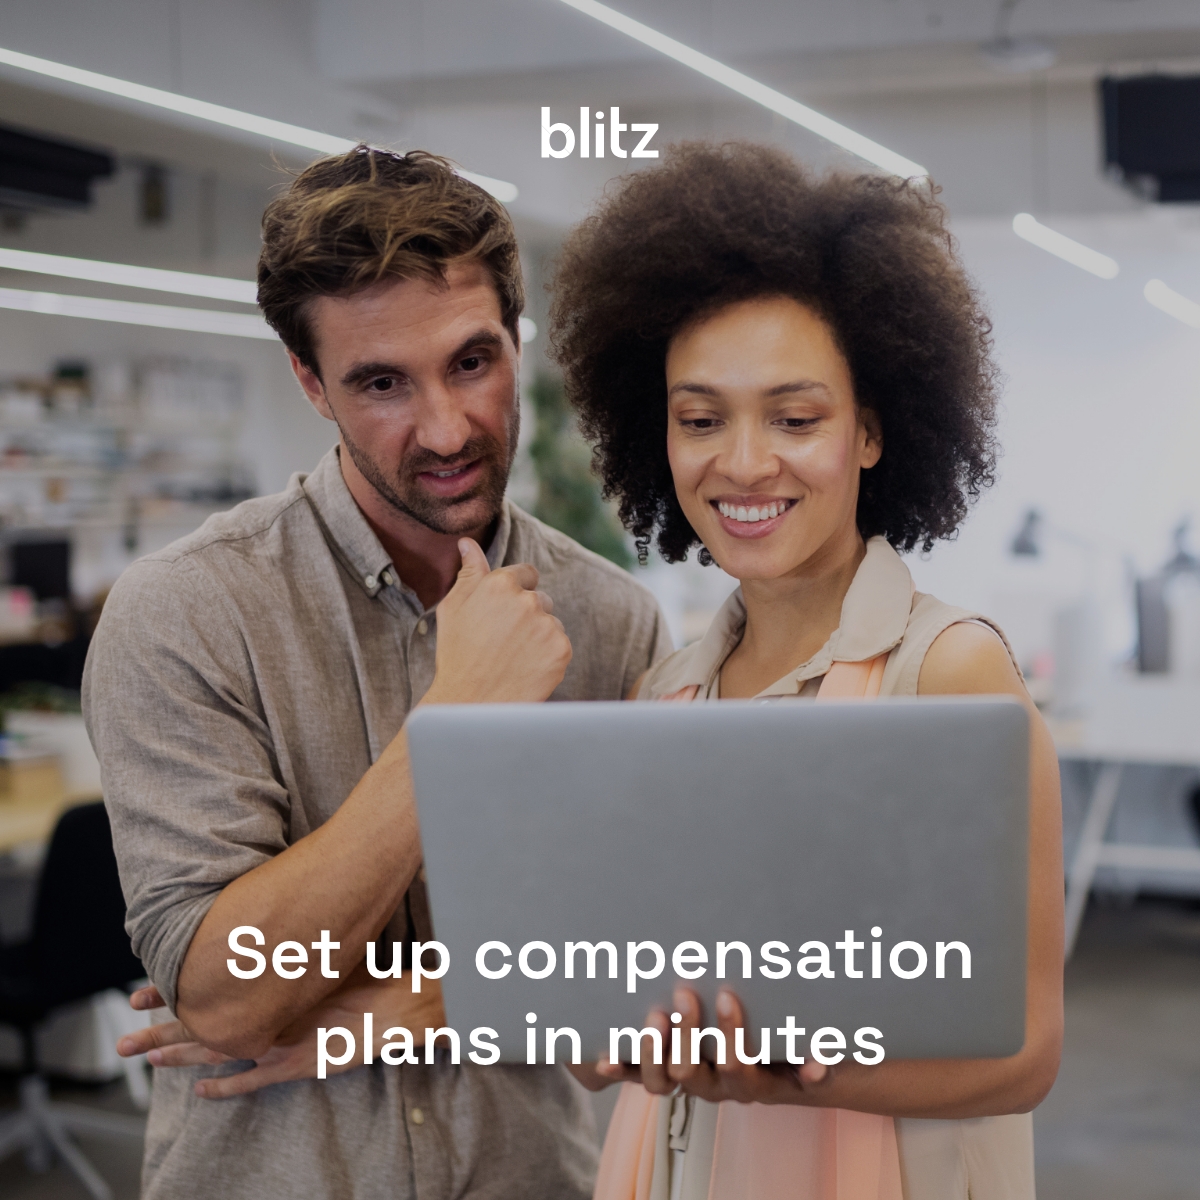 Get your entire sales force communicating and connecting in one simple and well-defined compensation structure. ​

Let’s talk about how we can help you drive a high-performance sales team: bit.ly/3GxcDhC ​
​
#SalesCompensation #Sales #Commissions #SalesOperations